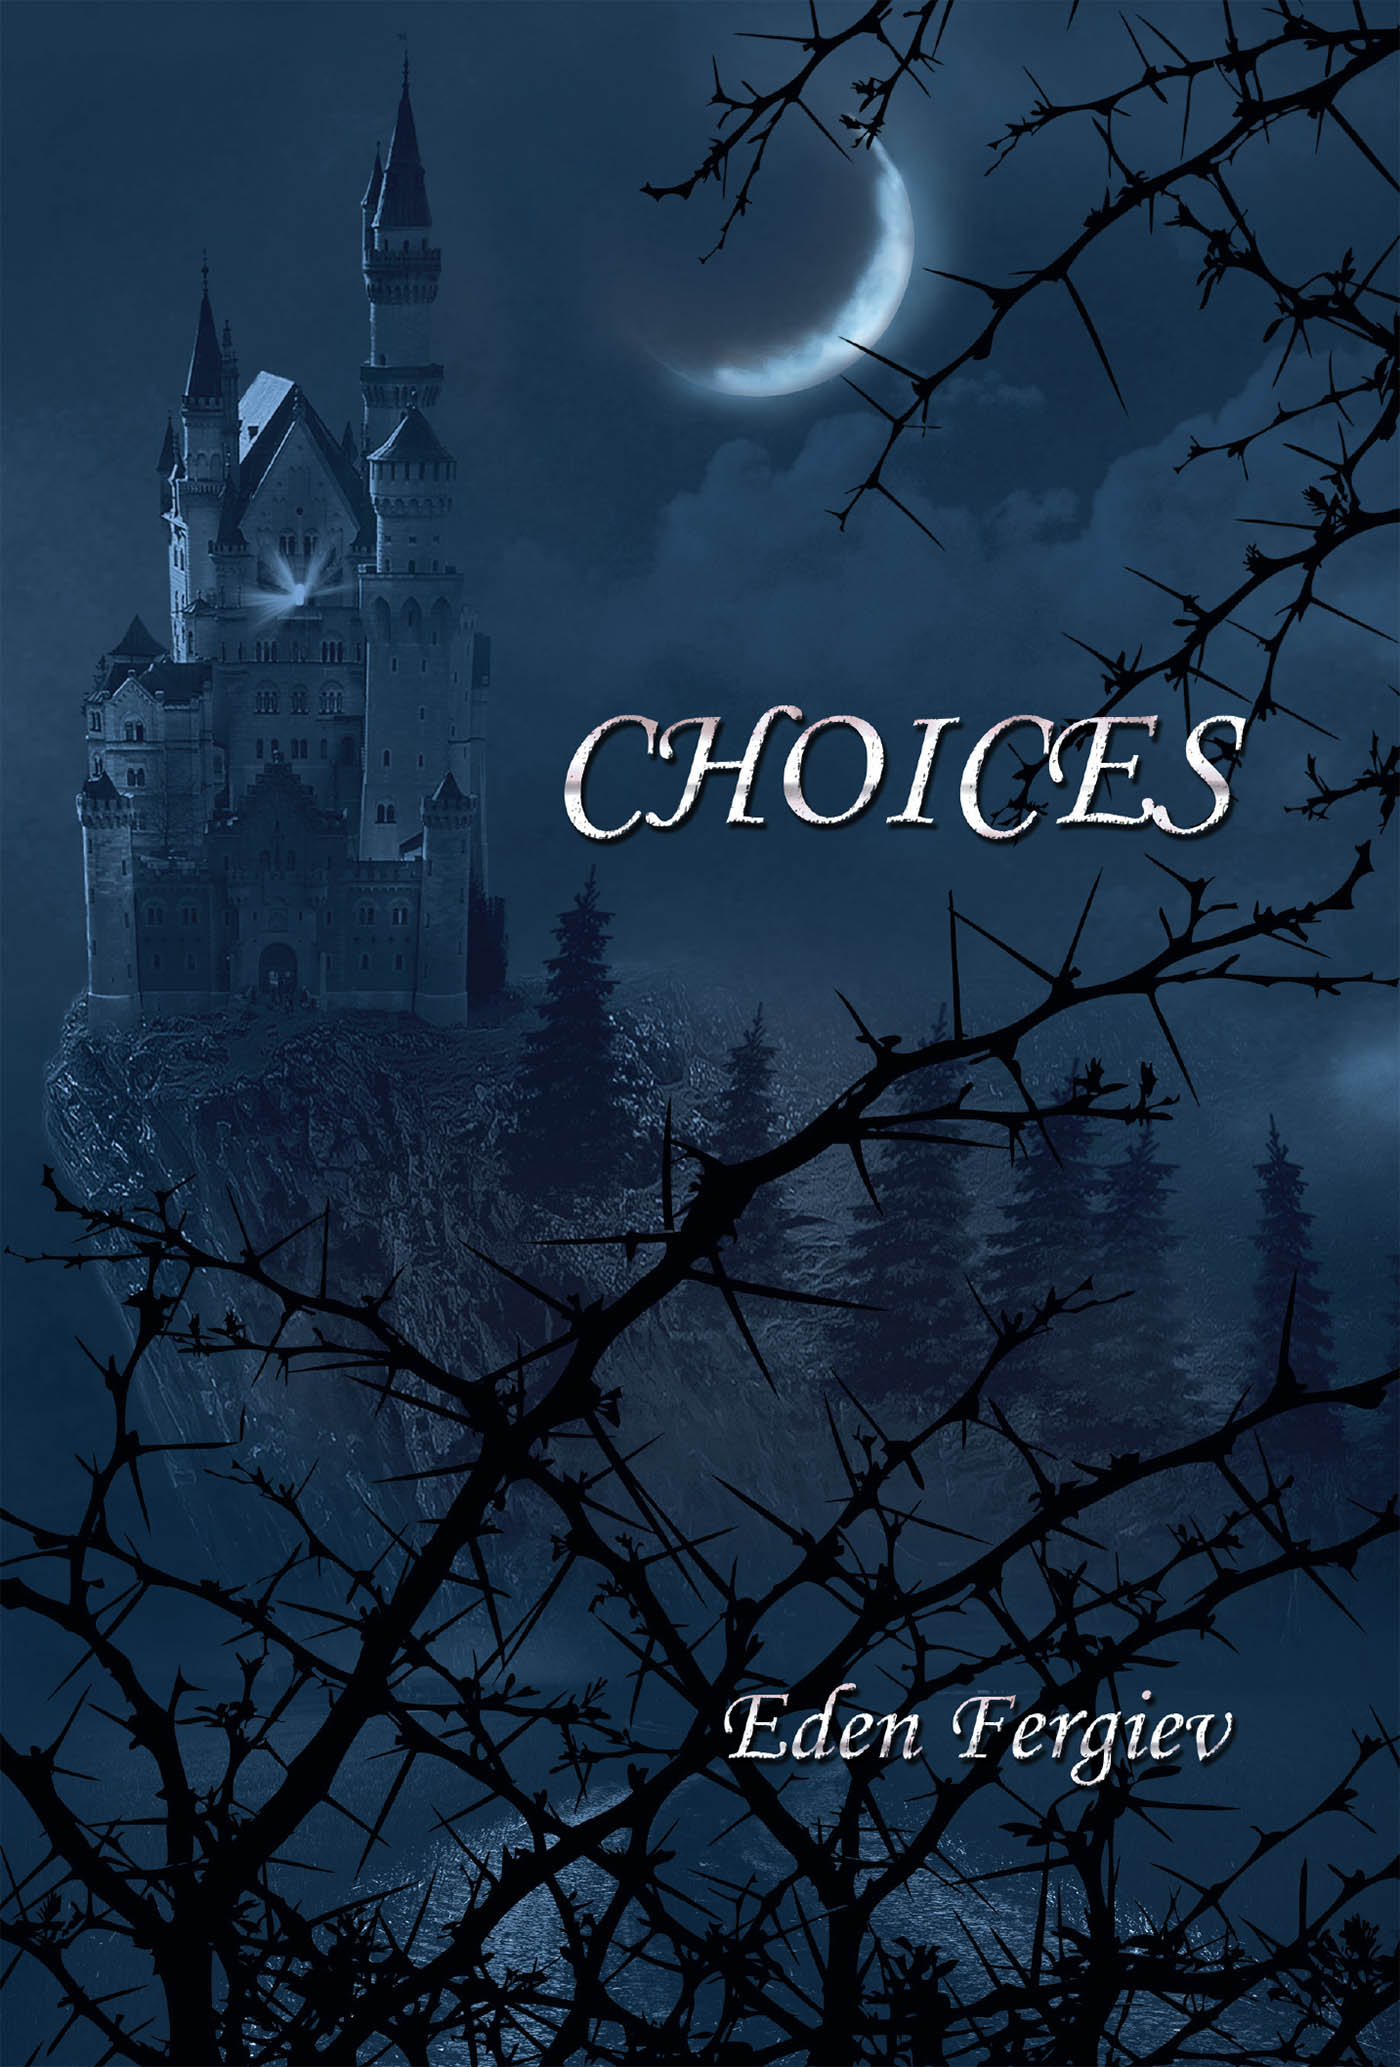 Choices Cover Image